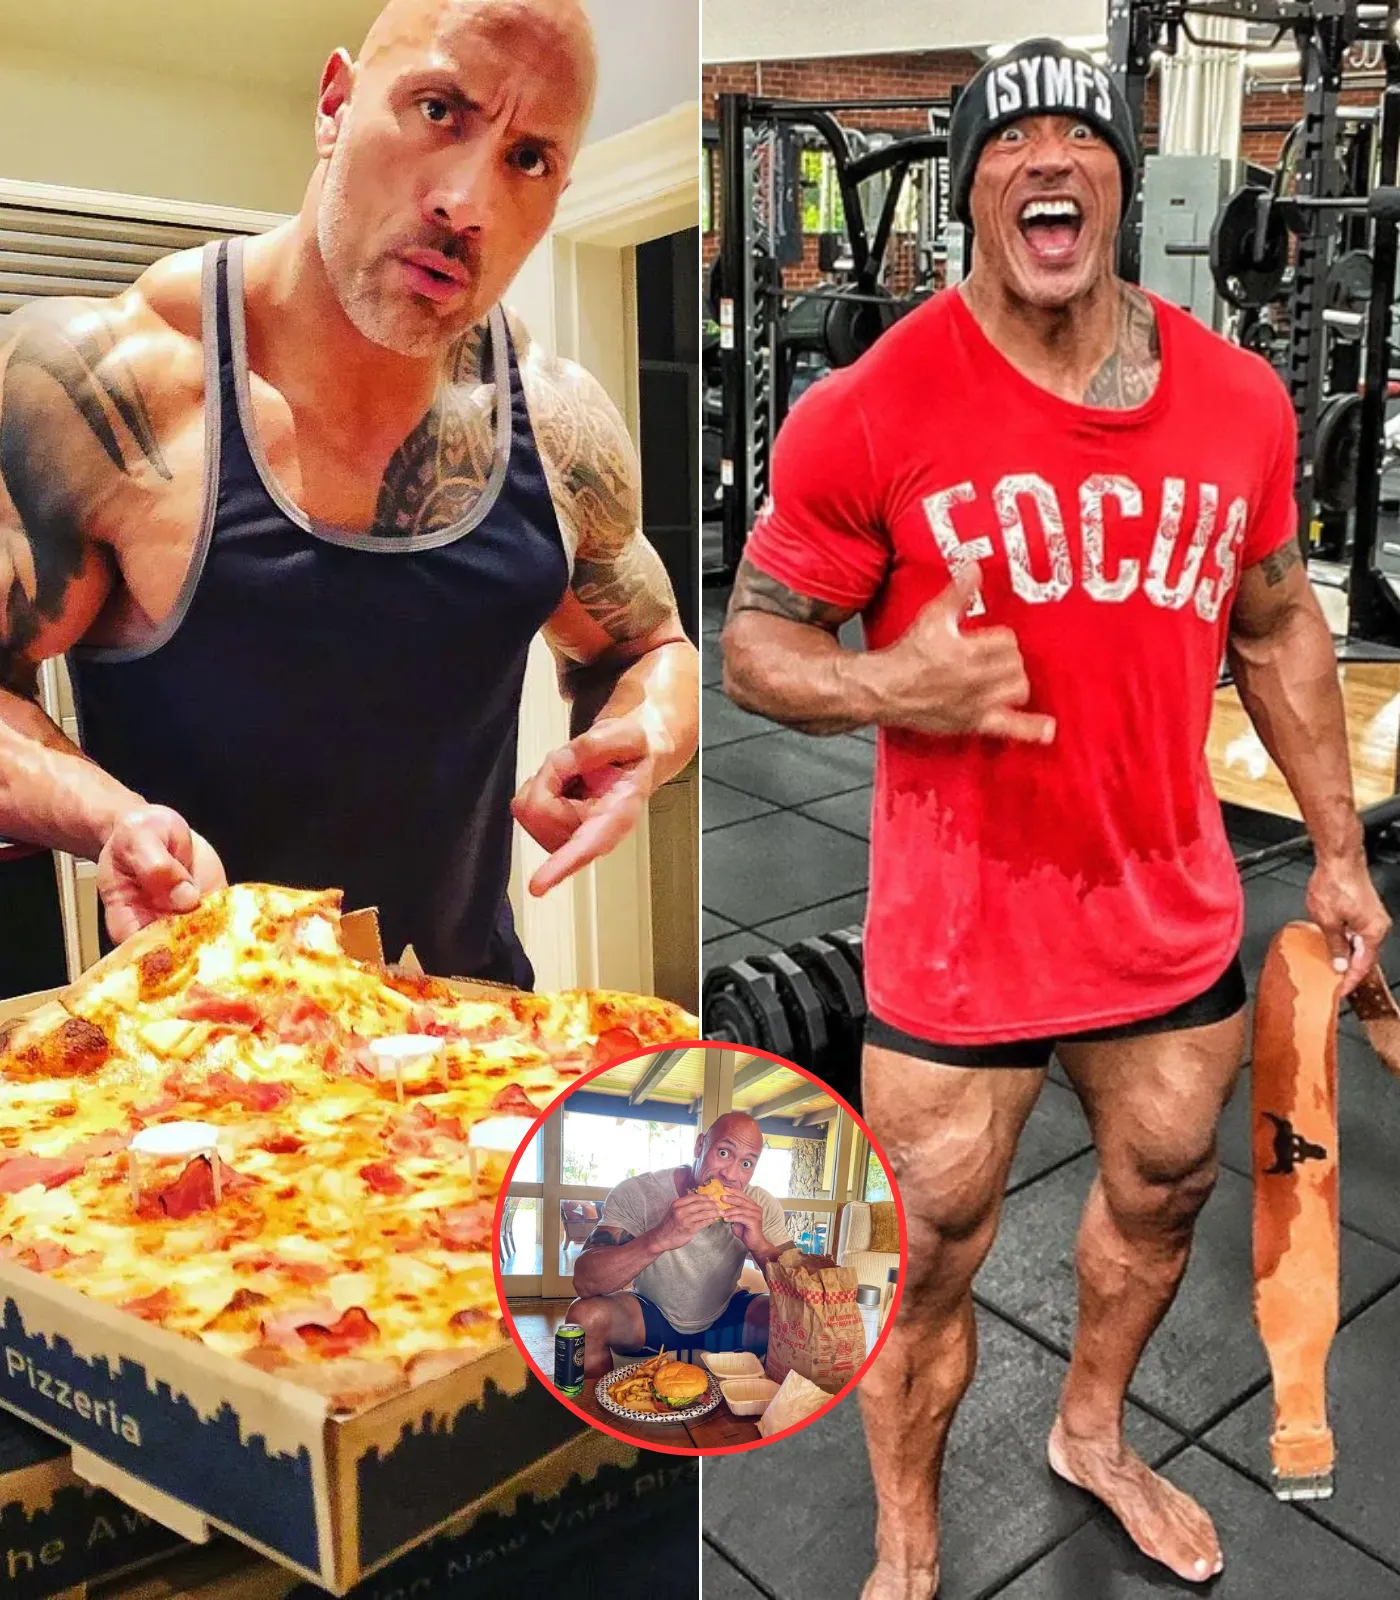 Dwayne ‘The Rock’ Johnson reveals massive ‘cheat meal’ including THREE pizzas and a dozen donuts after strict diet